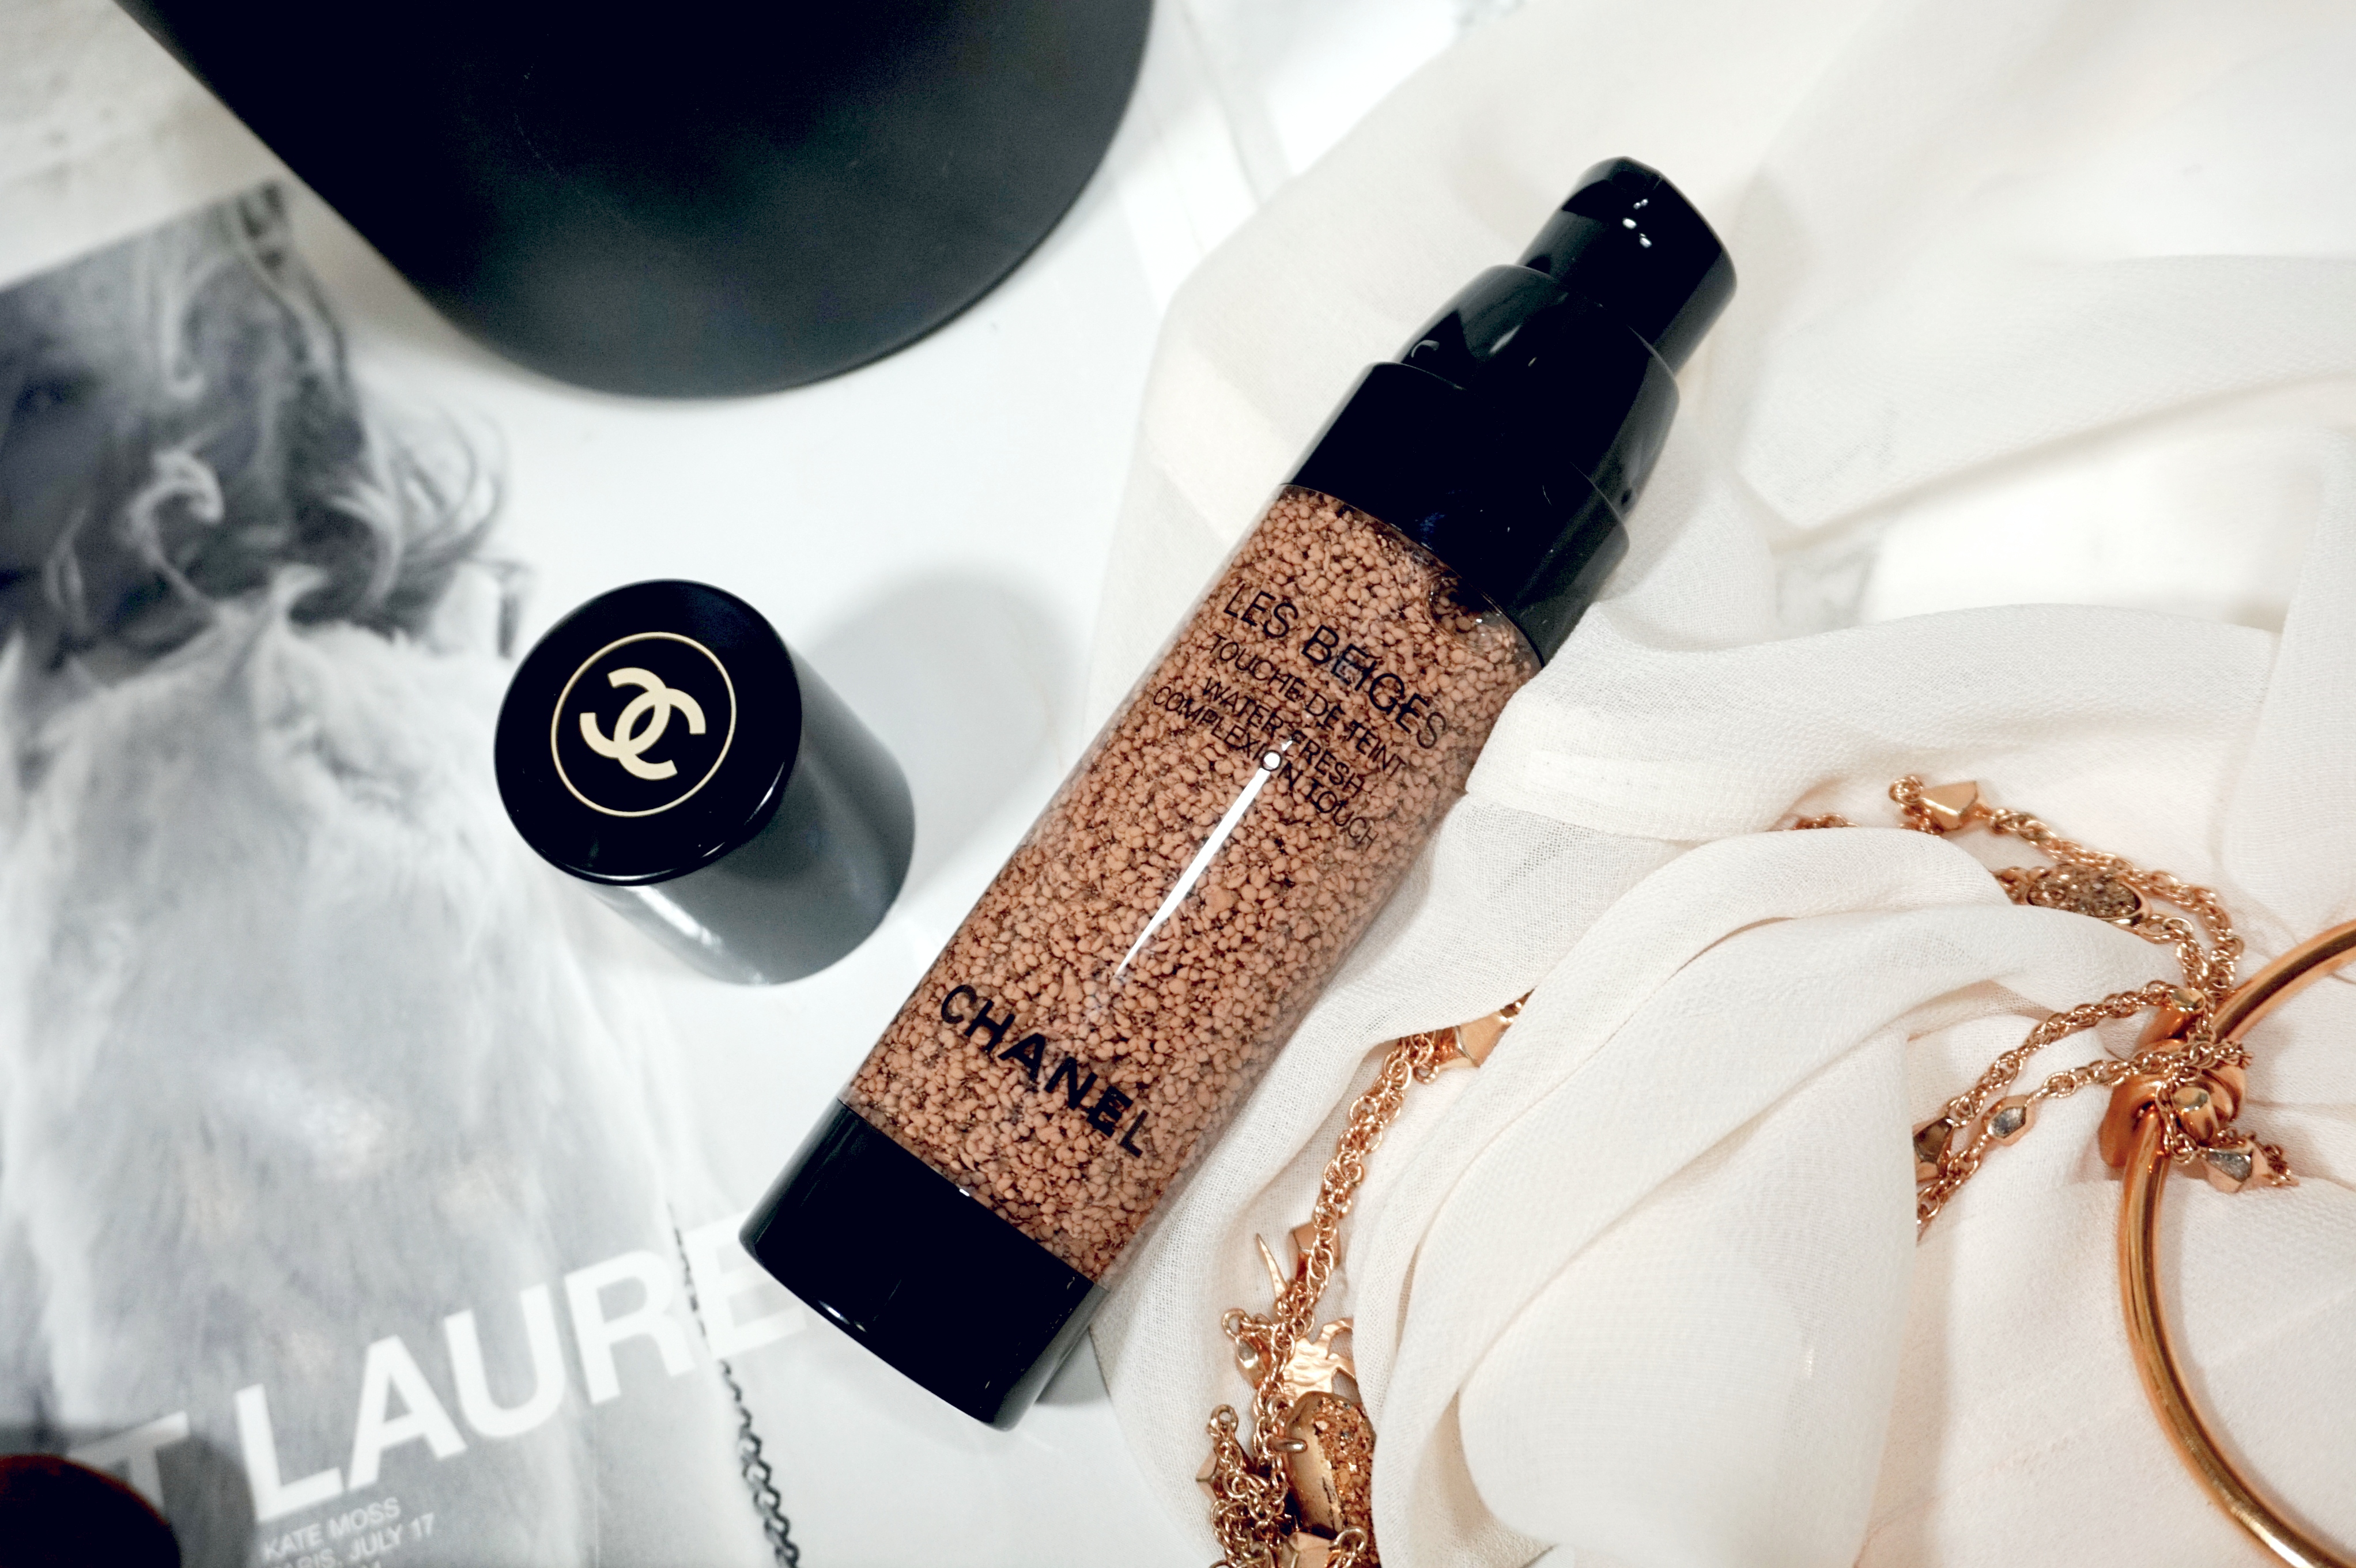 Review, Chanel Les Beiges Water-Fresh Complexion Touch